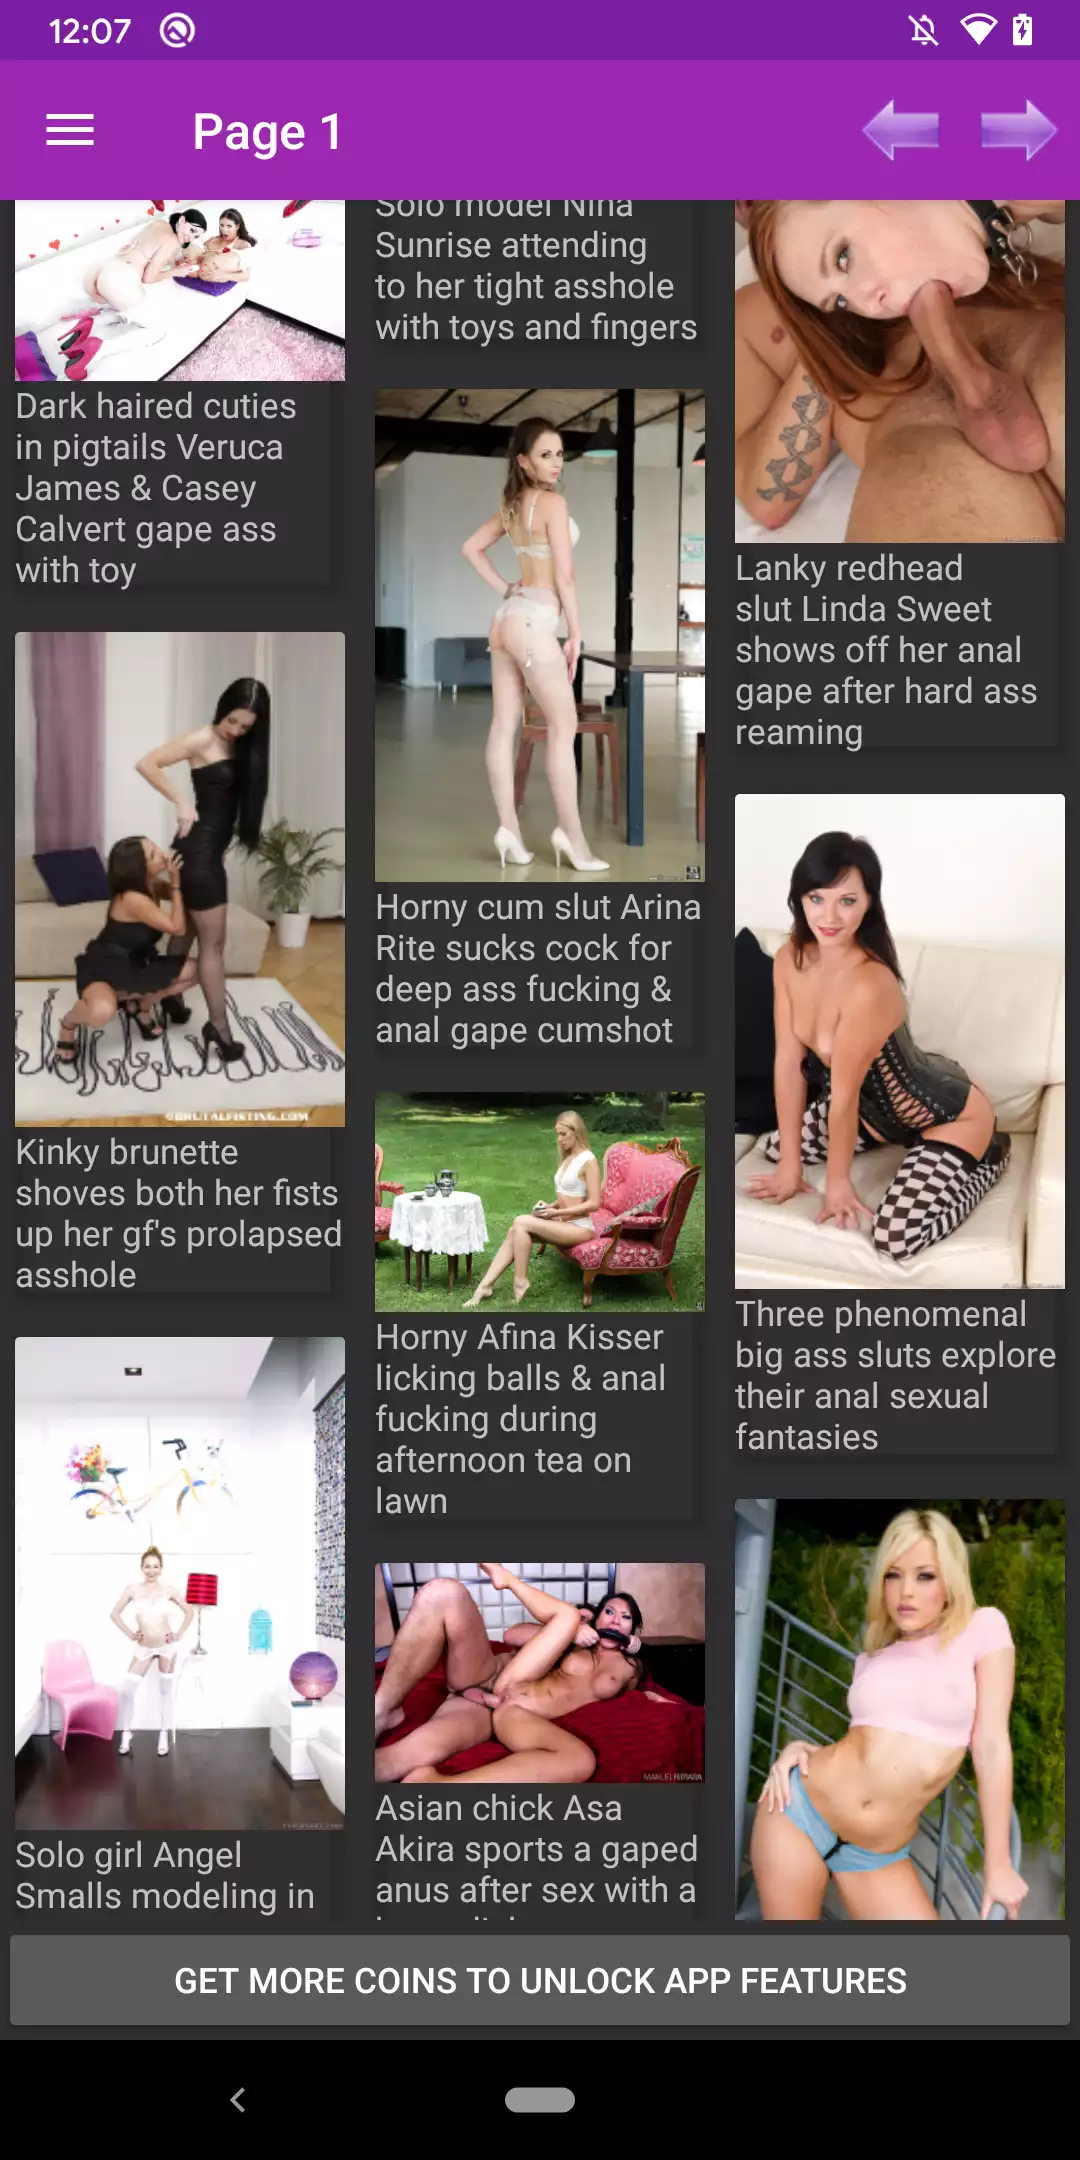 Anal Gape where,pornstars,sexy,adult,nhentai,pic,apps,anal,pornstar,anime,pics,hentia,gape,pegging,caprice,images,porn,galleries,gallery,hentai,app,download,pictures